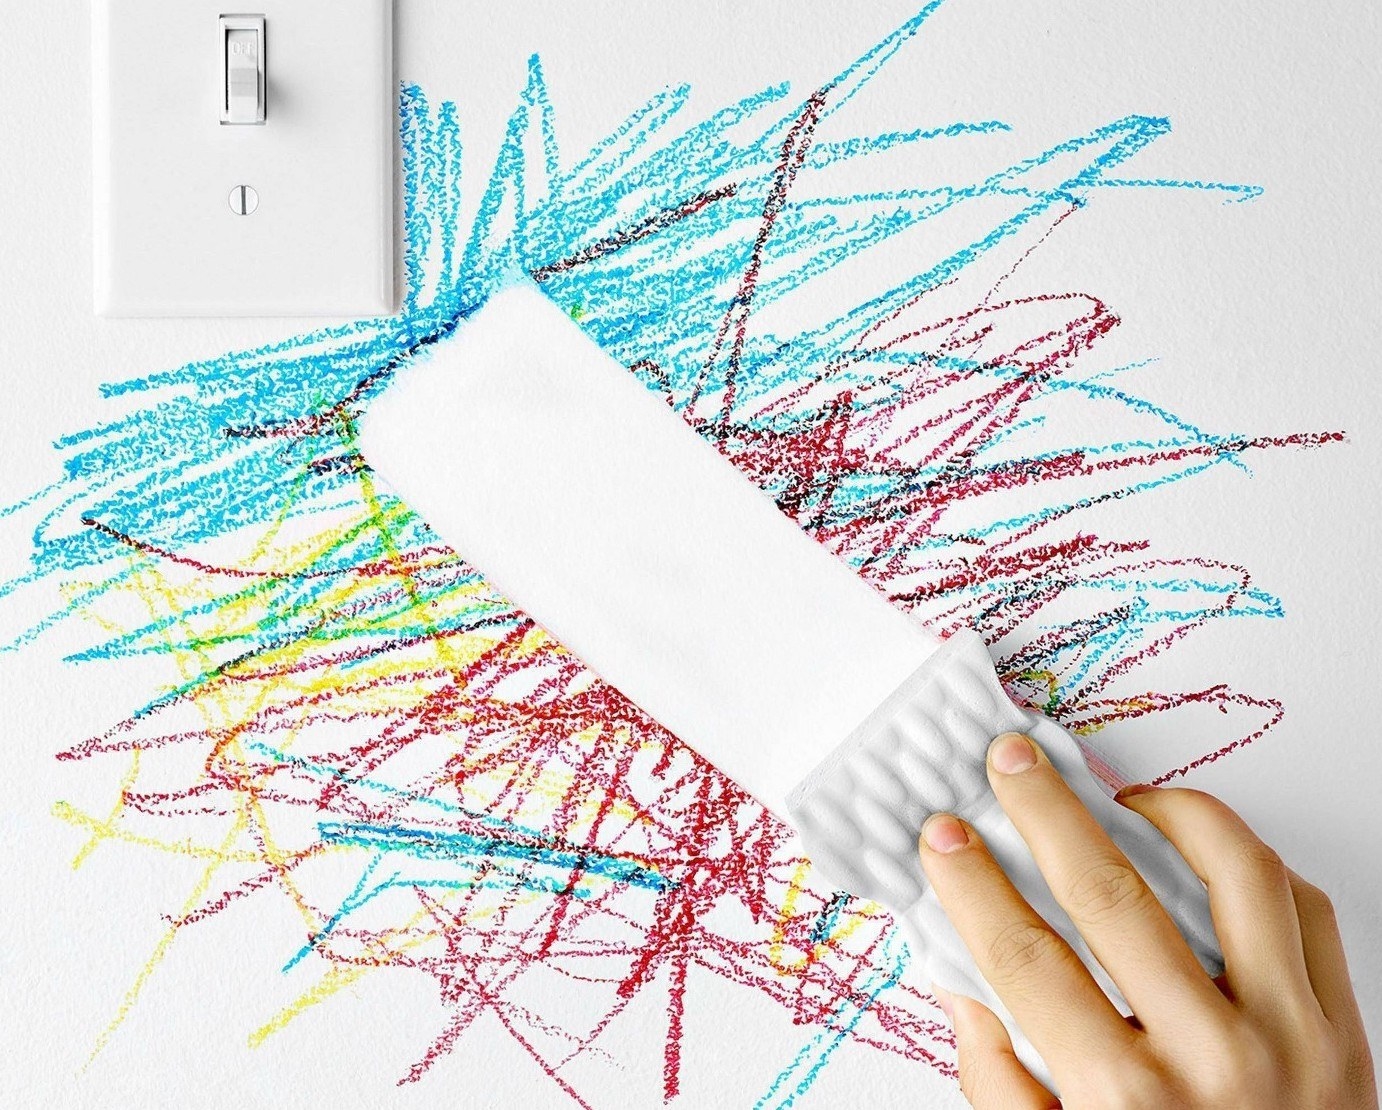 A person uses a magic eraser to remove crayon from the wall